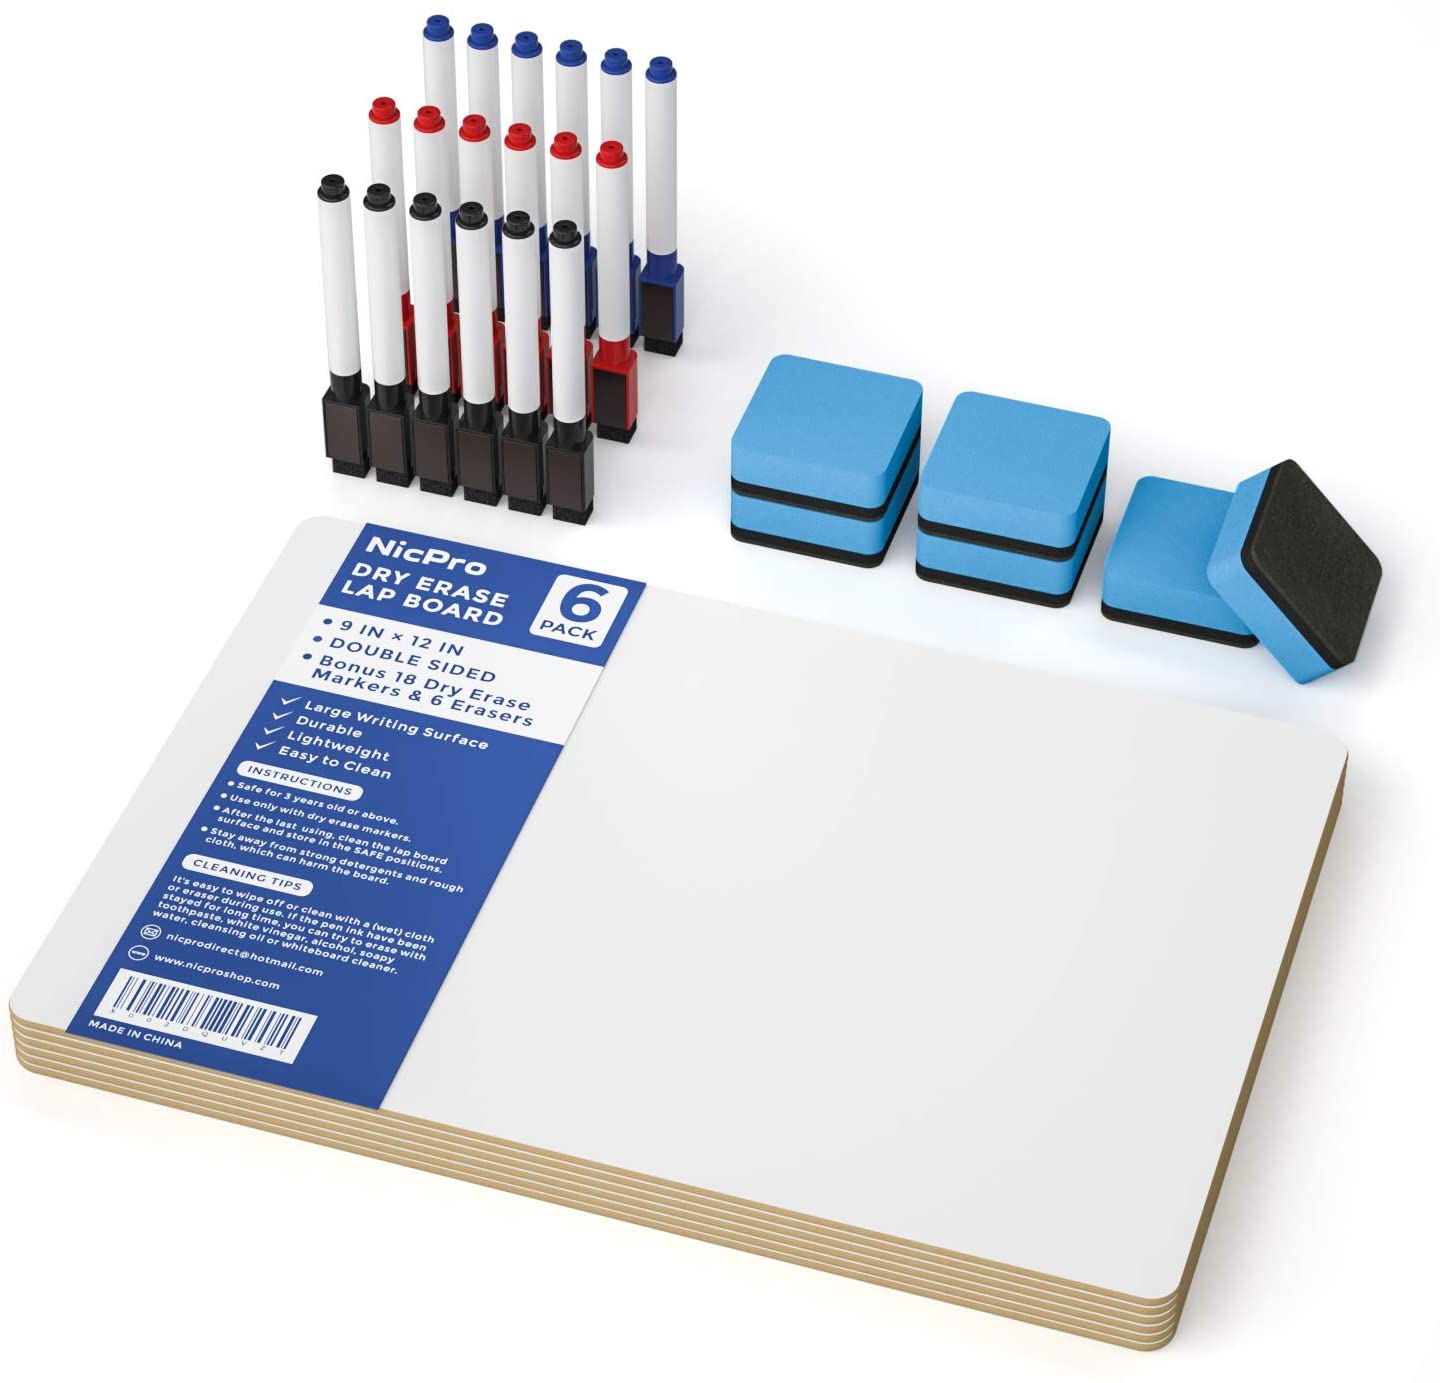 Nicpro 6 Pack Lapboard Small Dry Erase Lap Board 9 x 12 inches Double